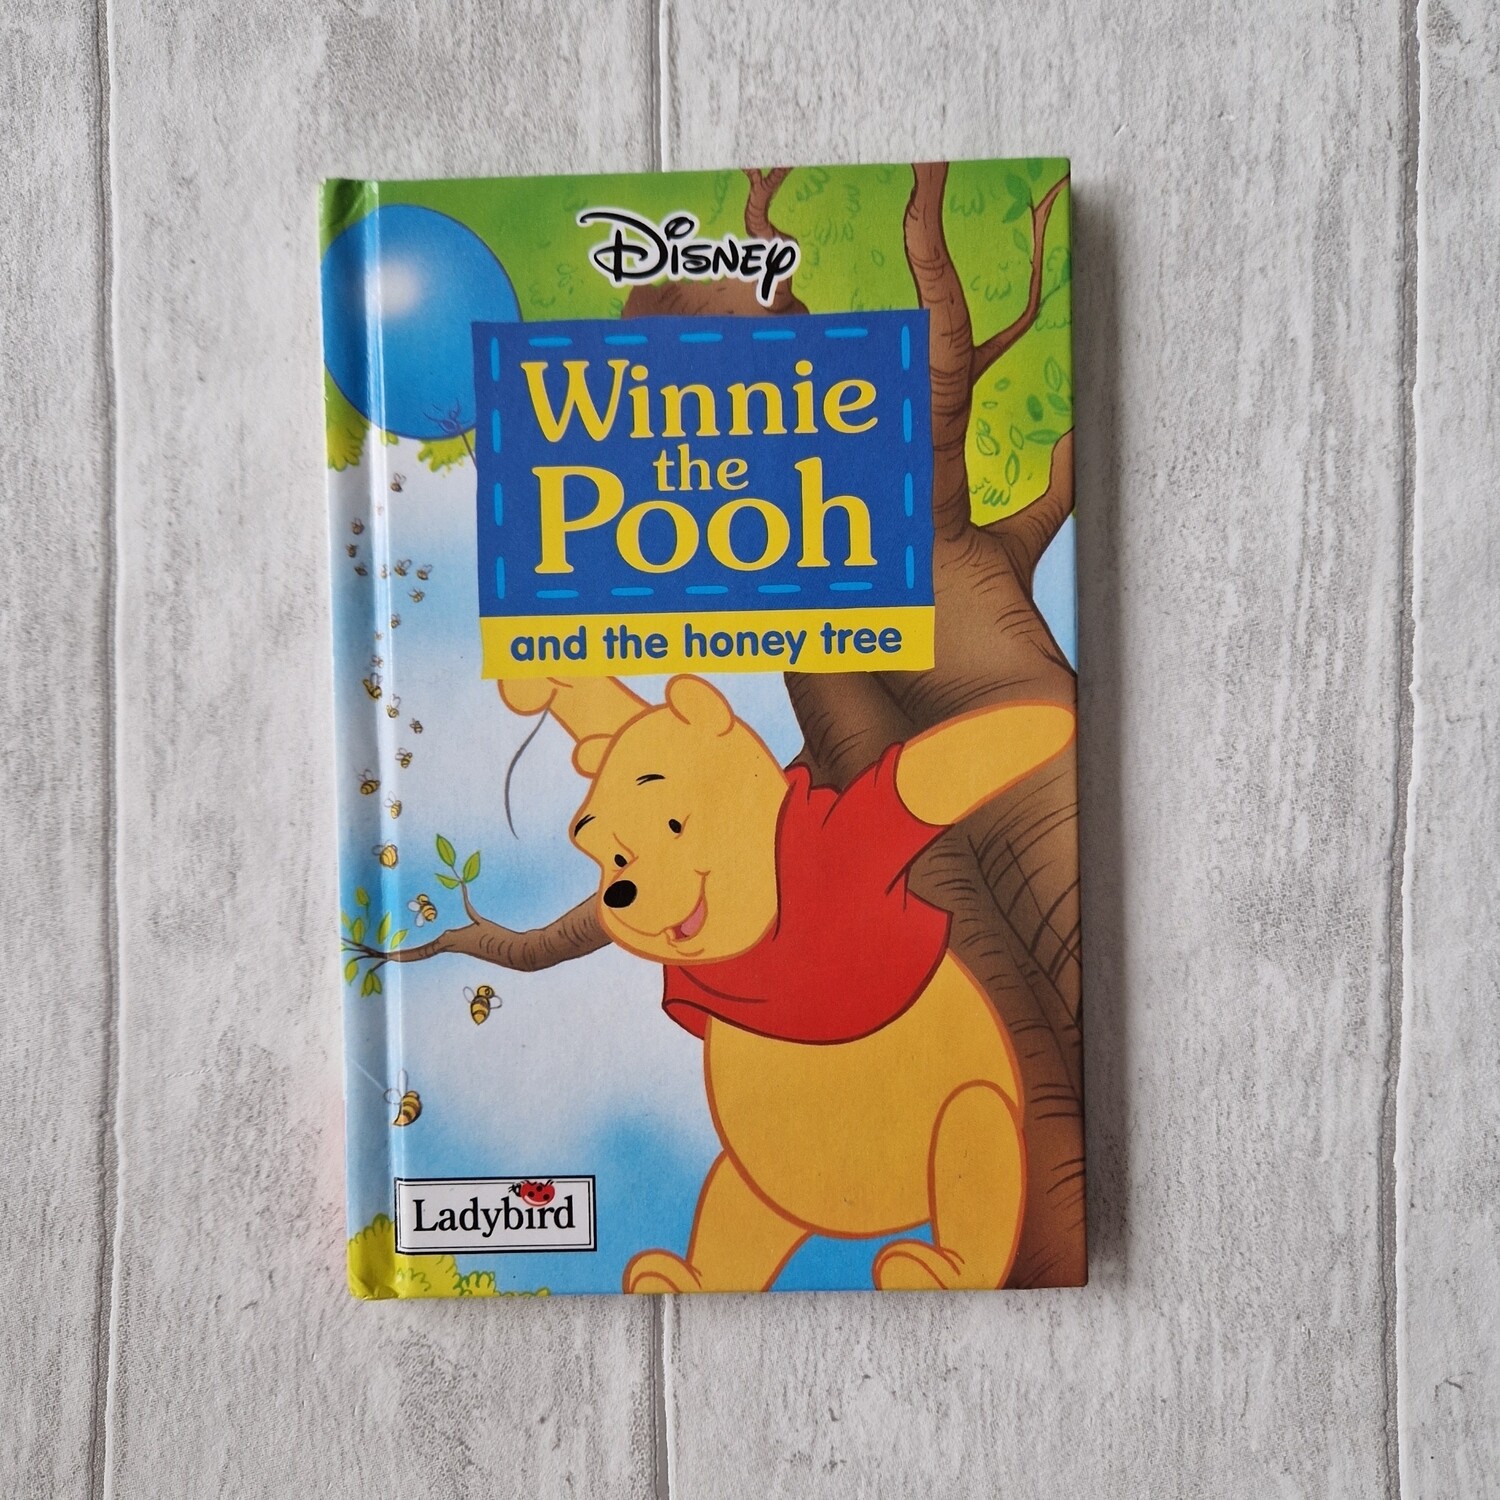 Winnie the Pooh Notebook - and the honey tree